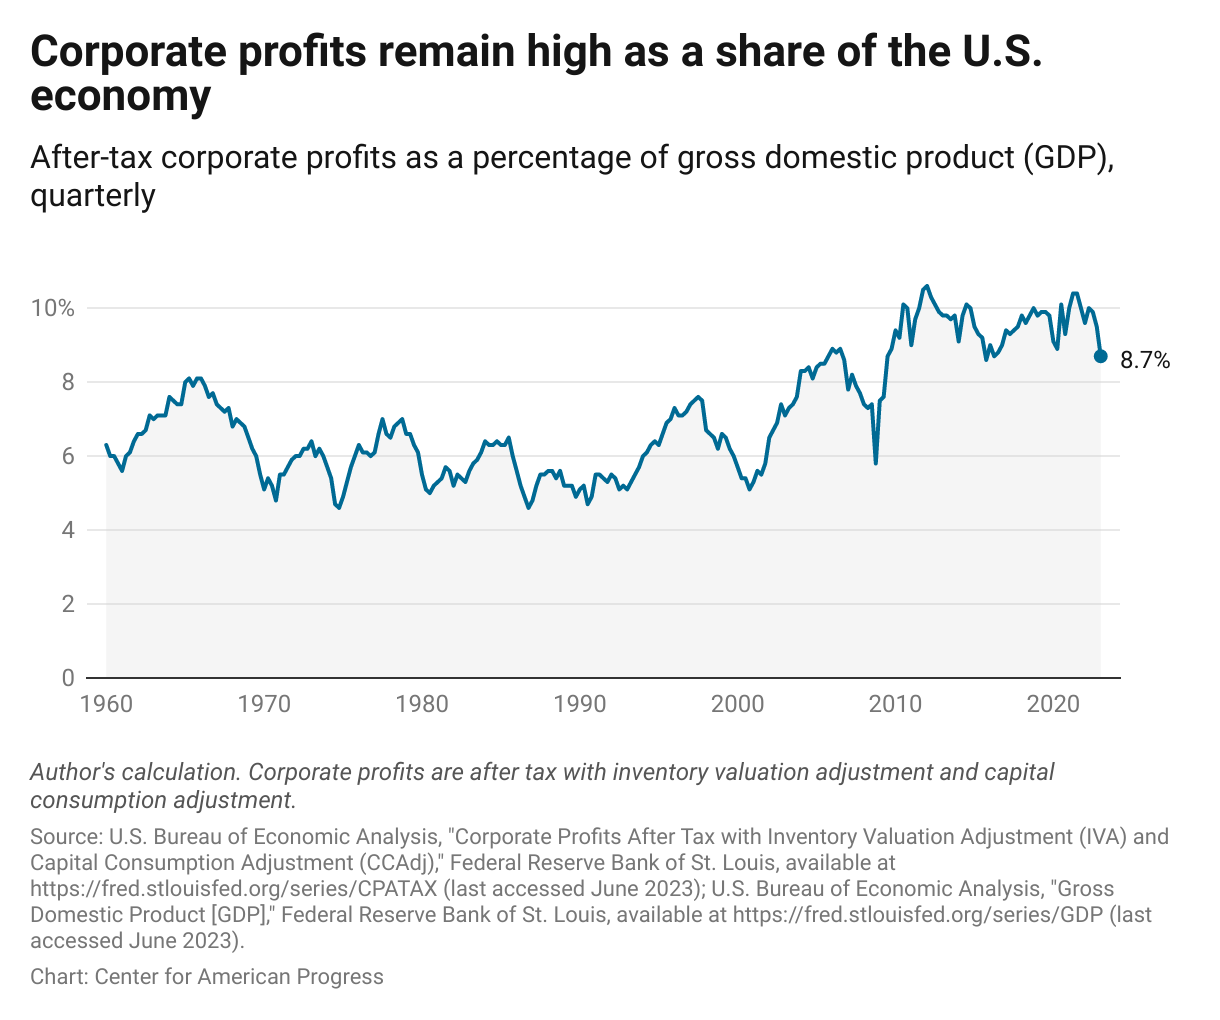 Line graph showing corporate profits as a percentage of GDP from 1960 through the first quarter of 2023, which have risen over time and have remained relatively high since 2010.